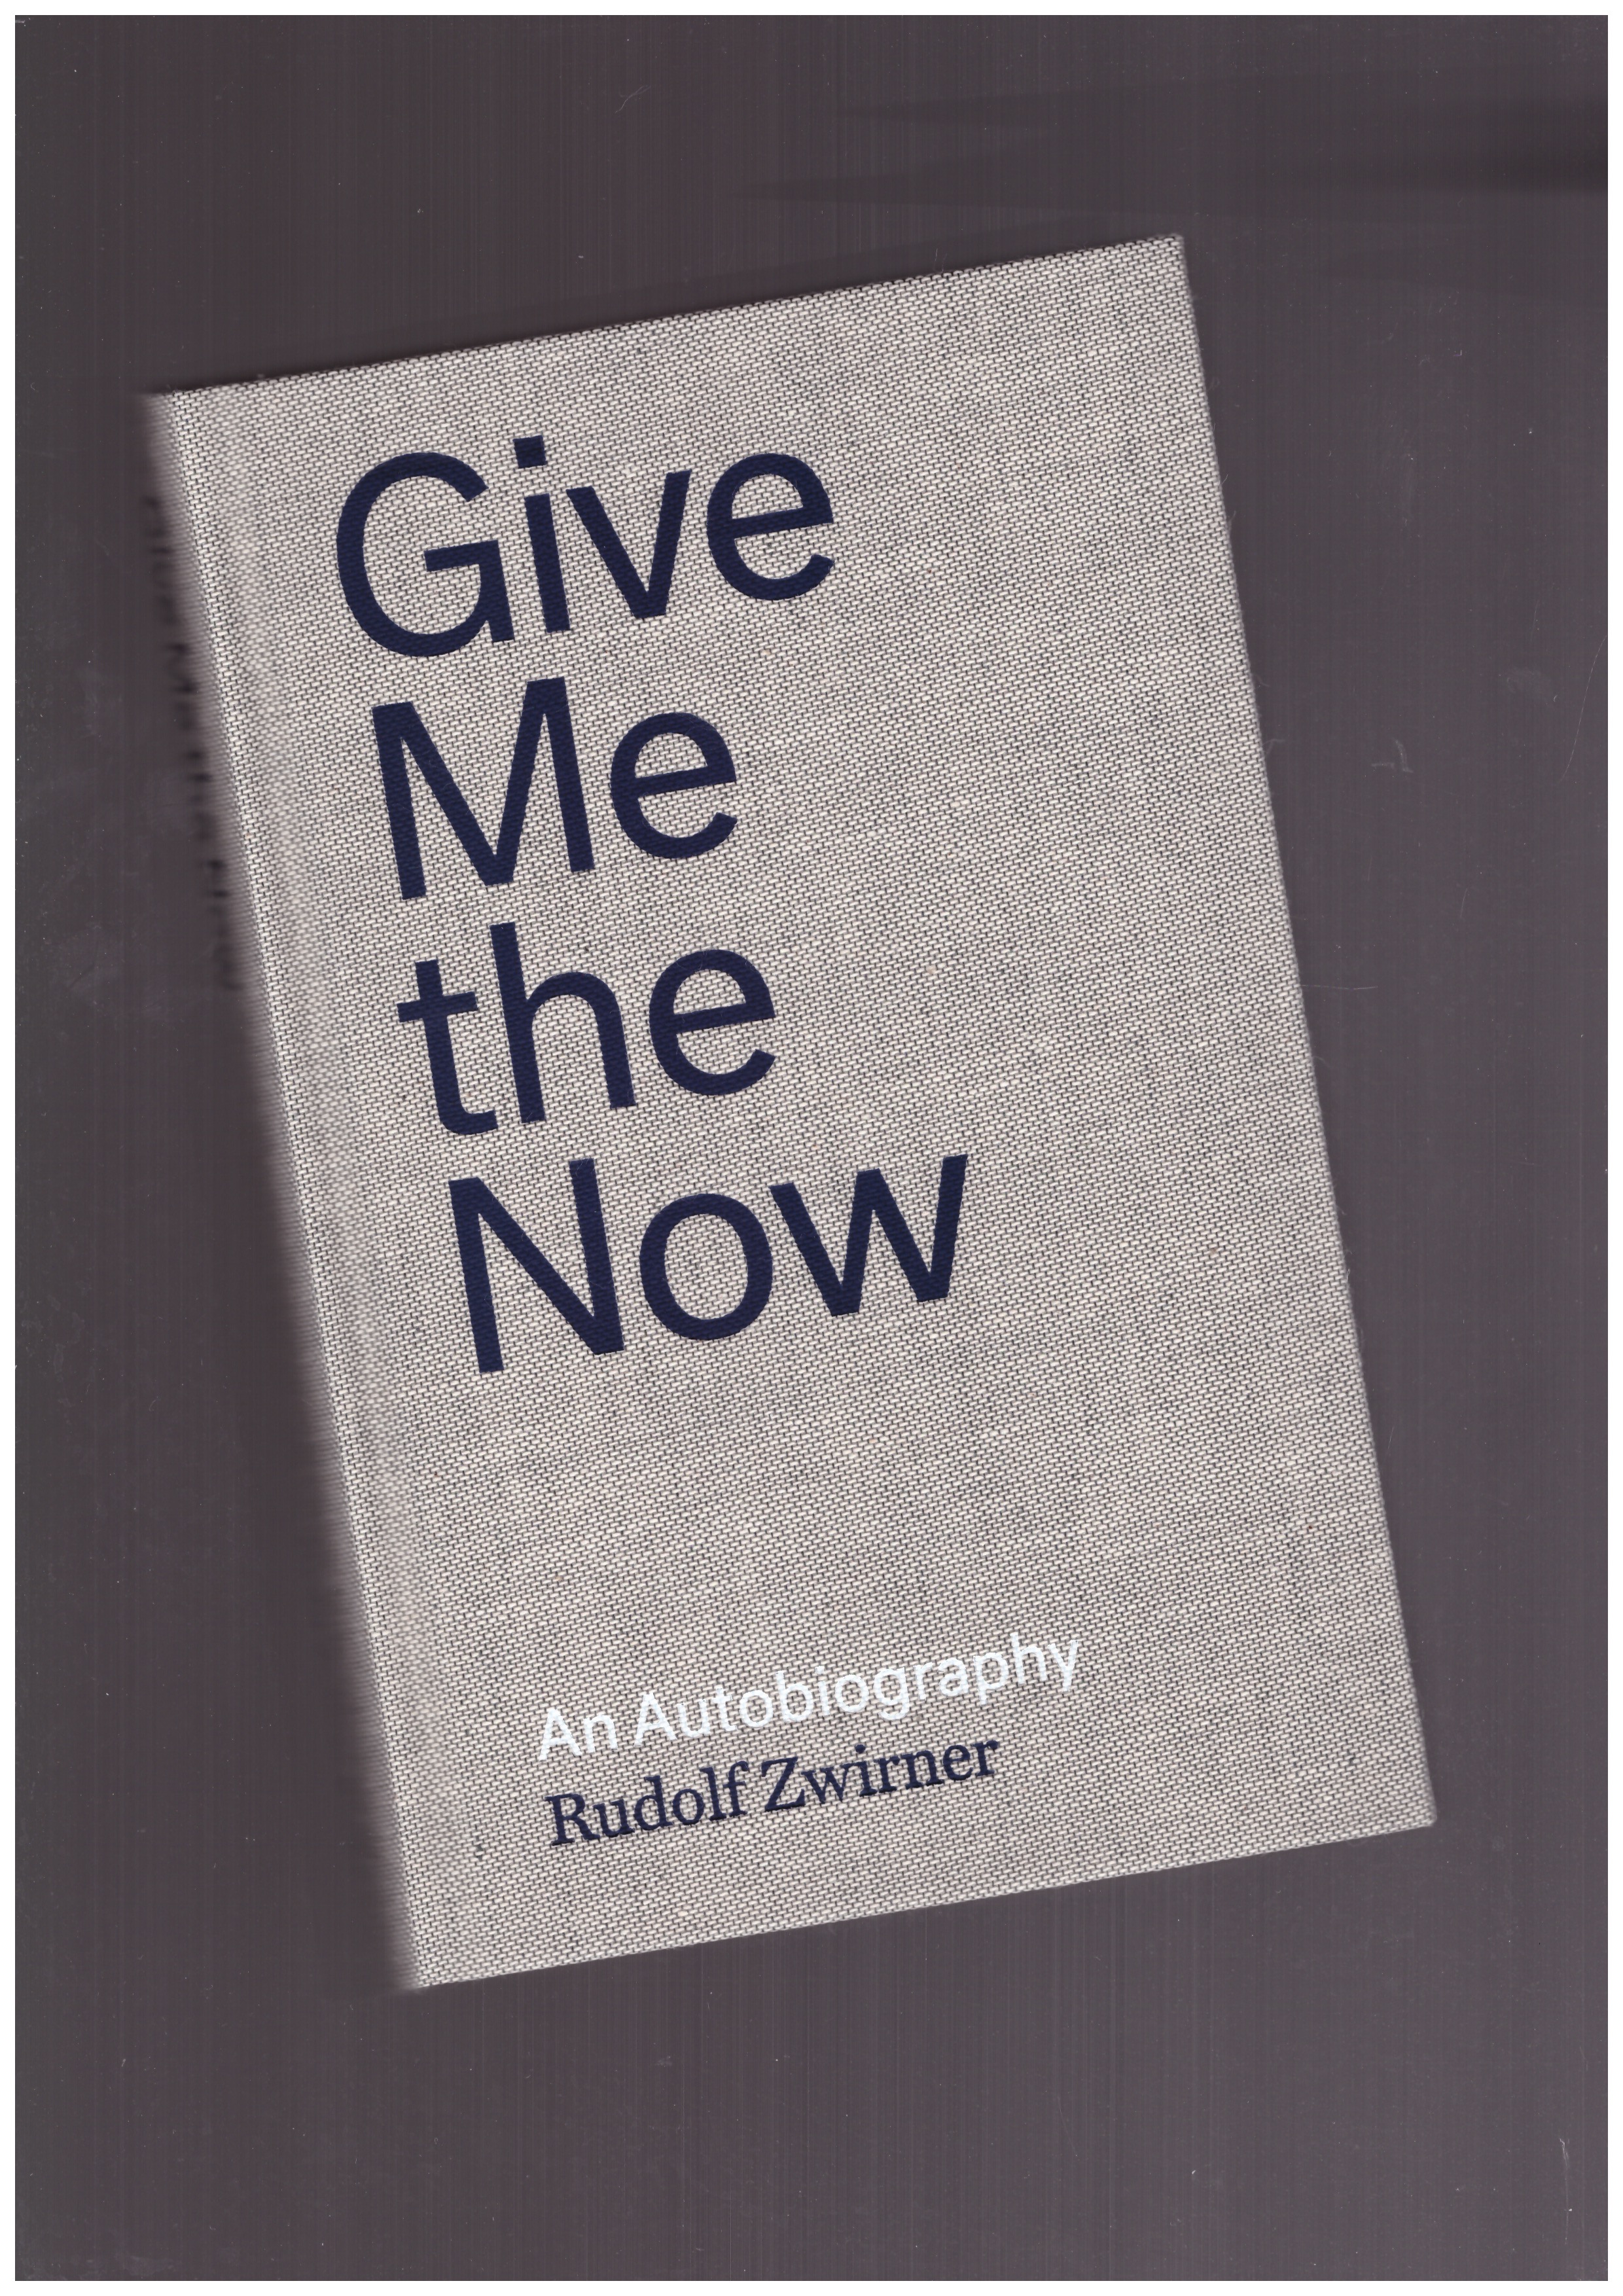 ZWIRNER, Rudolf - Give Me the Now